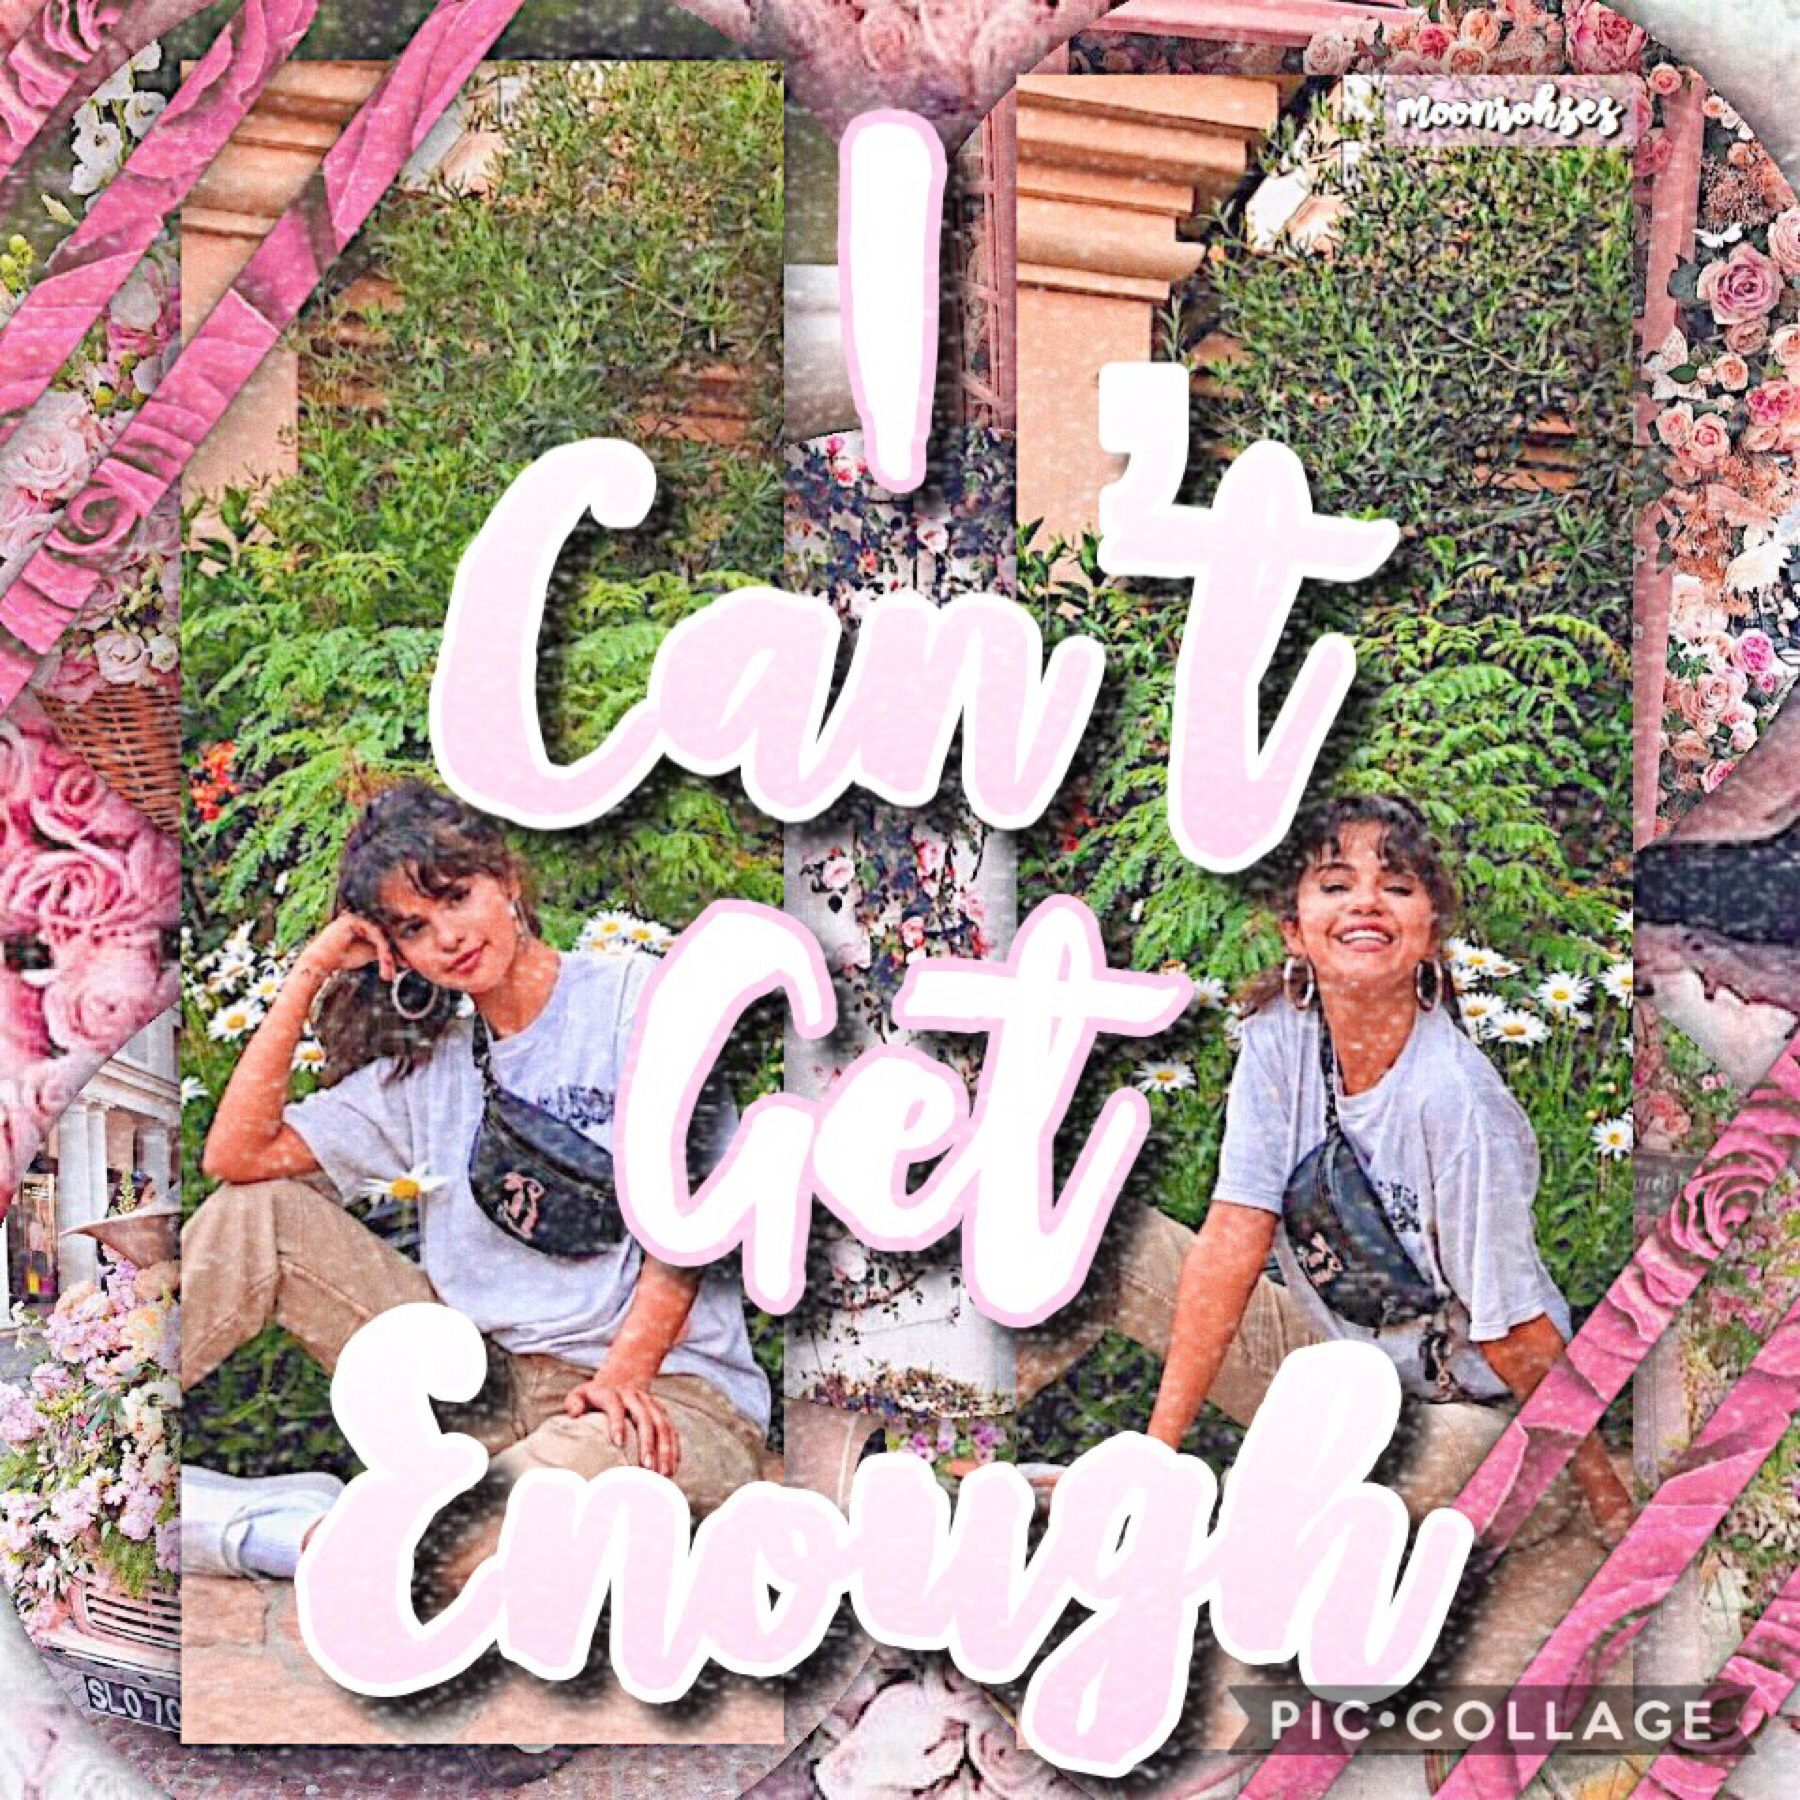 🌷 t a p 🌷

Song - I cant get enough - Benny Blanco, Tainy, Selena Gomez, J Balvin 

Rate ?/10 

I still have a lot of edits to post oof 